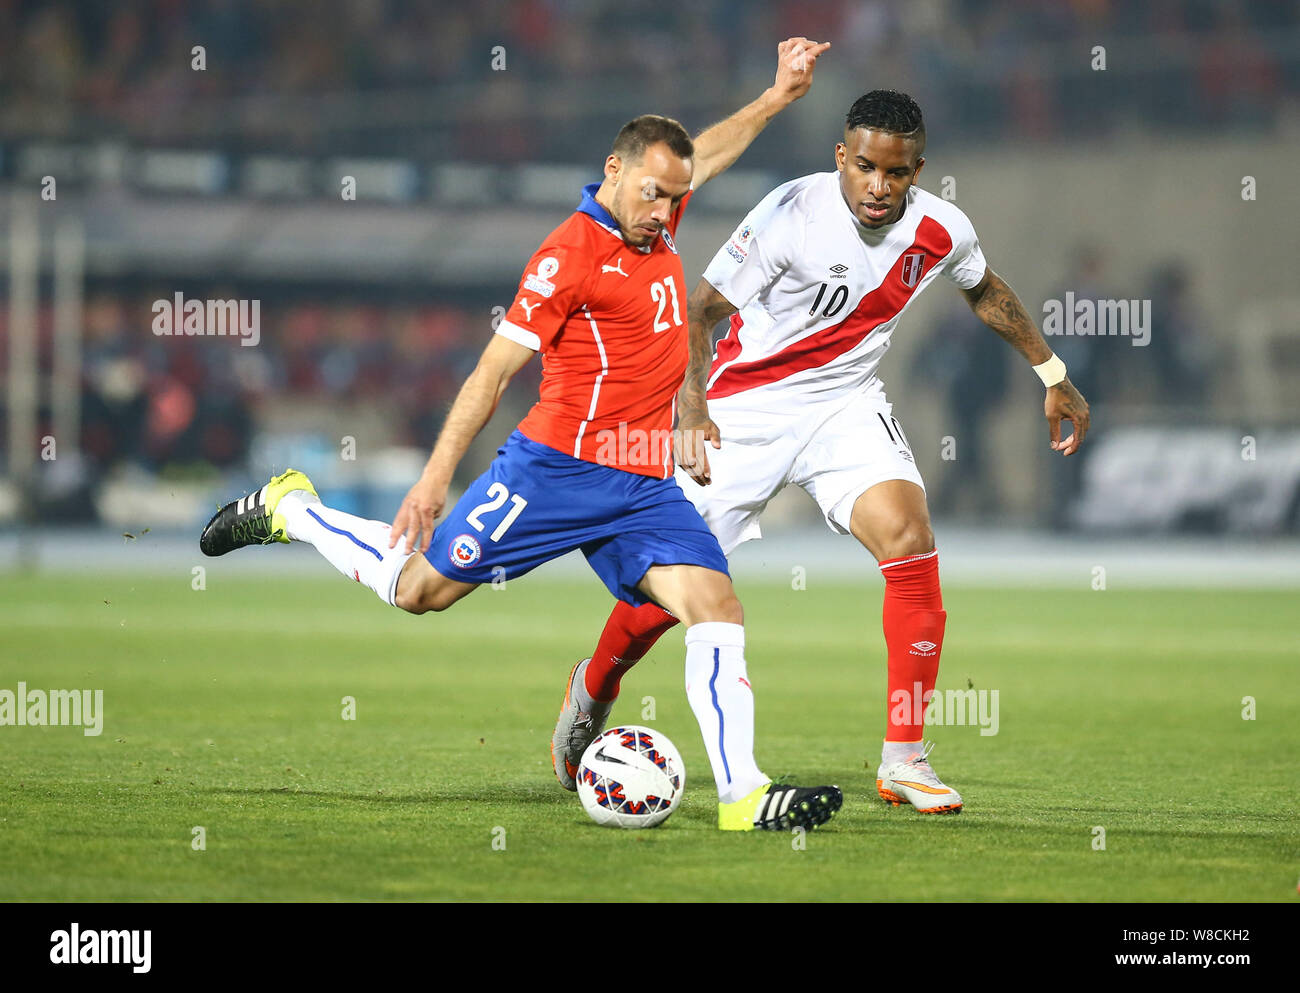 Chile's Marcelo Diaz, left, shoots against Peru during the Copa America 2015 semi-final soccer match between Chile and Peru at the National Stadium in Stock Photo